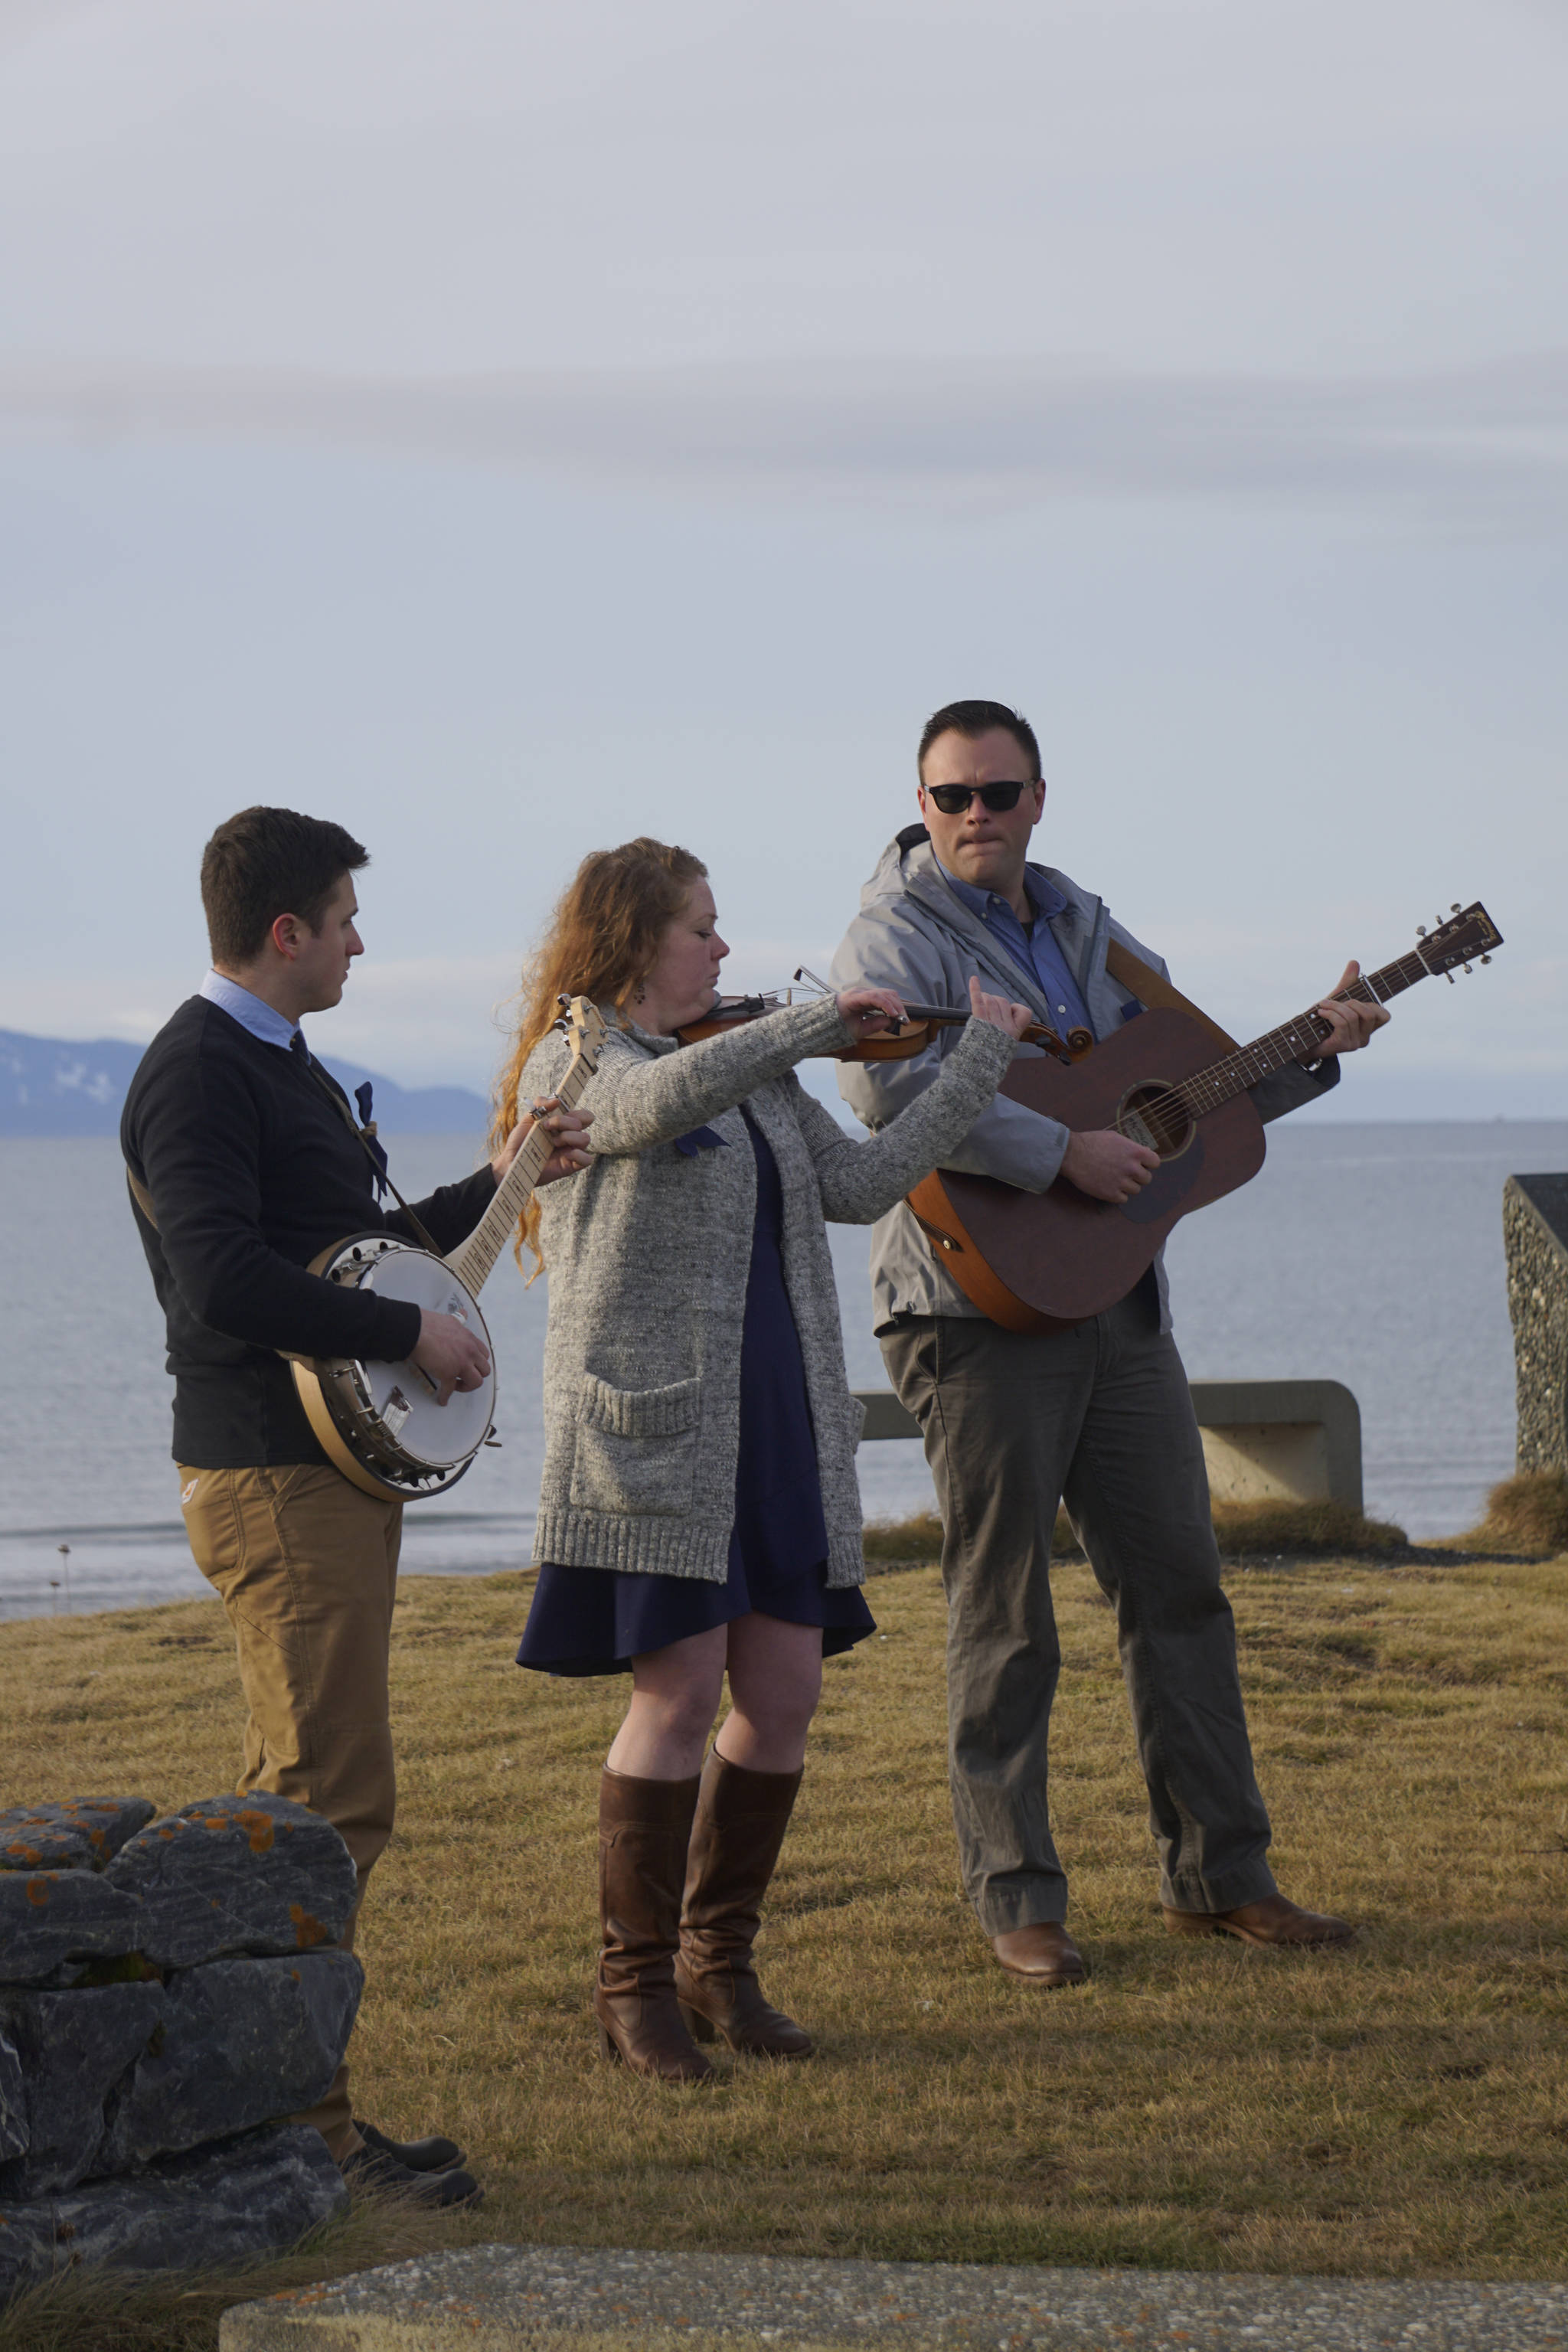 From left to right, Josh Kennedy, Kate Klann and Geddy Miller perform “I Bid You Goodbye” at a memorial service for Chief Warrant Officer Michael Kozloski on Friday morning, Feb. 8, 2019, at the Seafarer’s Memorial on the Homer Spit, Homer, Alaska. Kennedy served on the U.S. Coast Cutter Hickory with Kozloski and Miller is captain of the U.S. Coast Guard Cutter Naushon. (Photo by Michael Armstrong/Homer News)